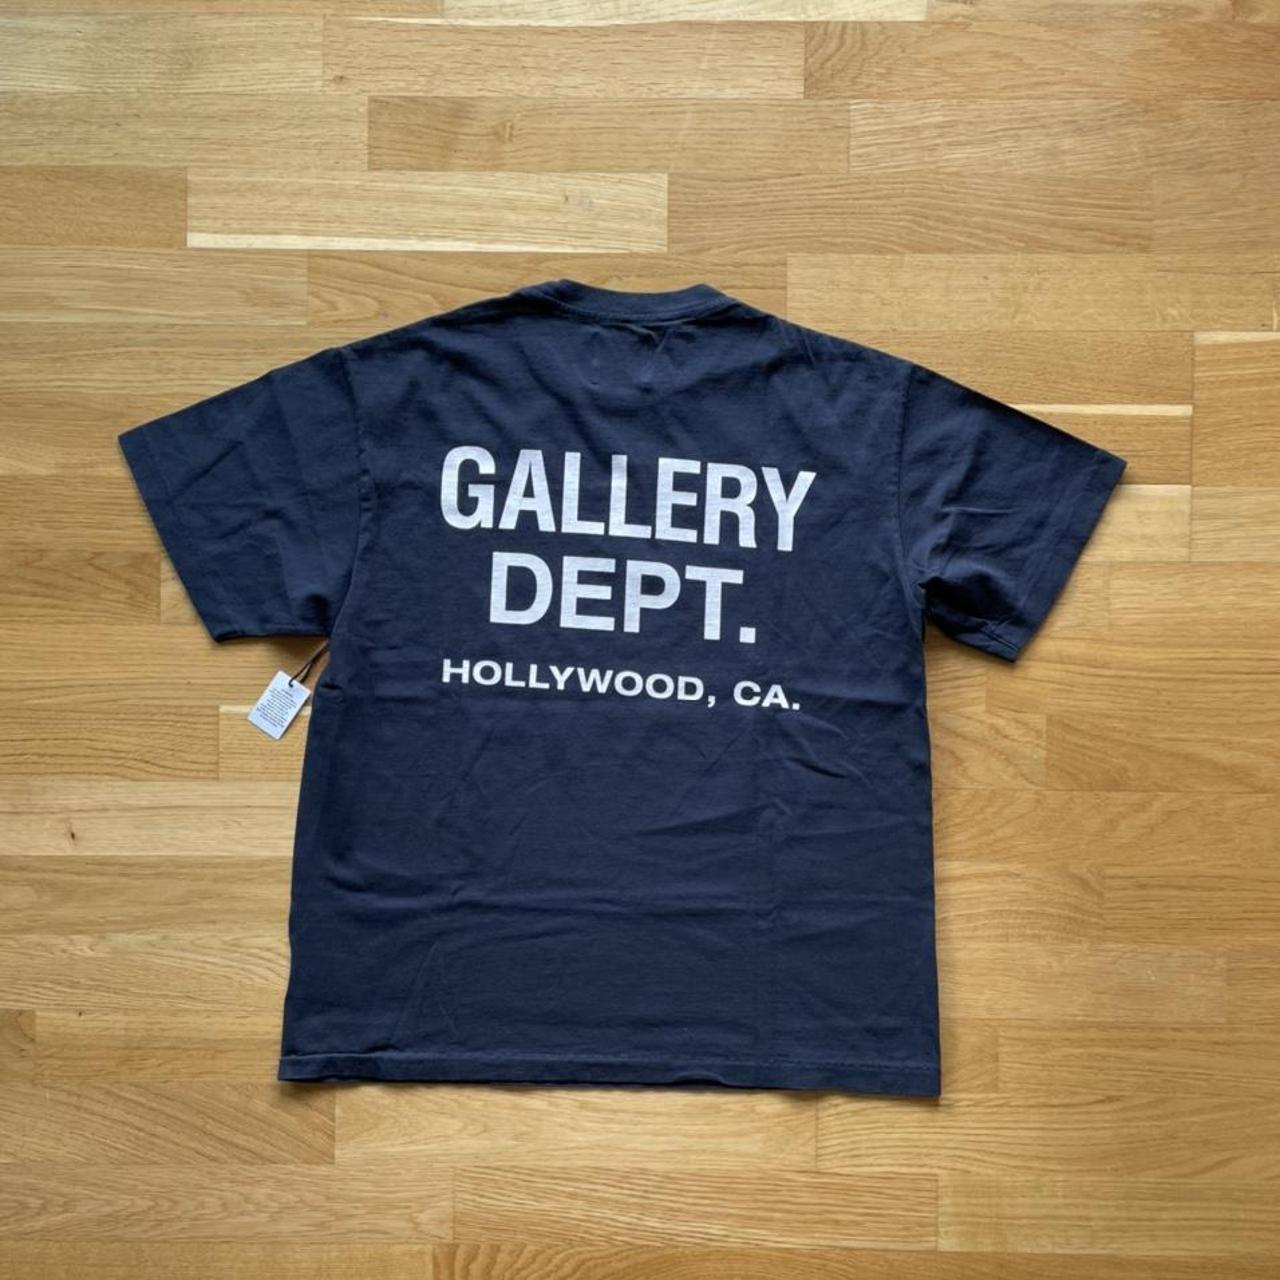 Gallery Dept. Men's Navy and White T-shirt (2)